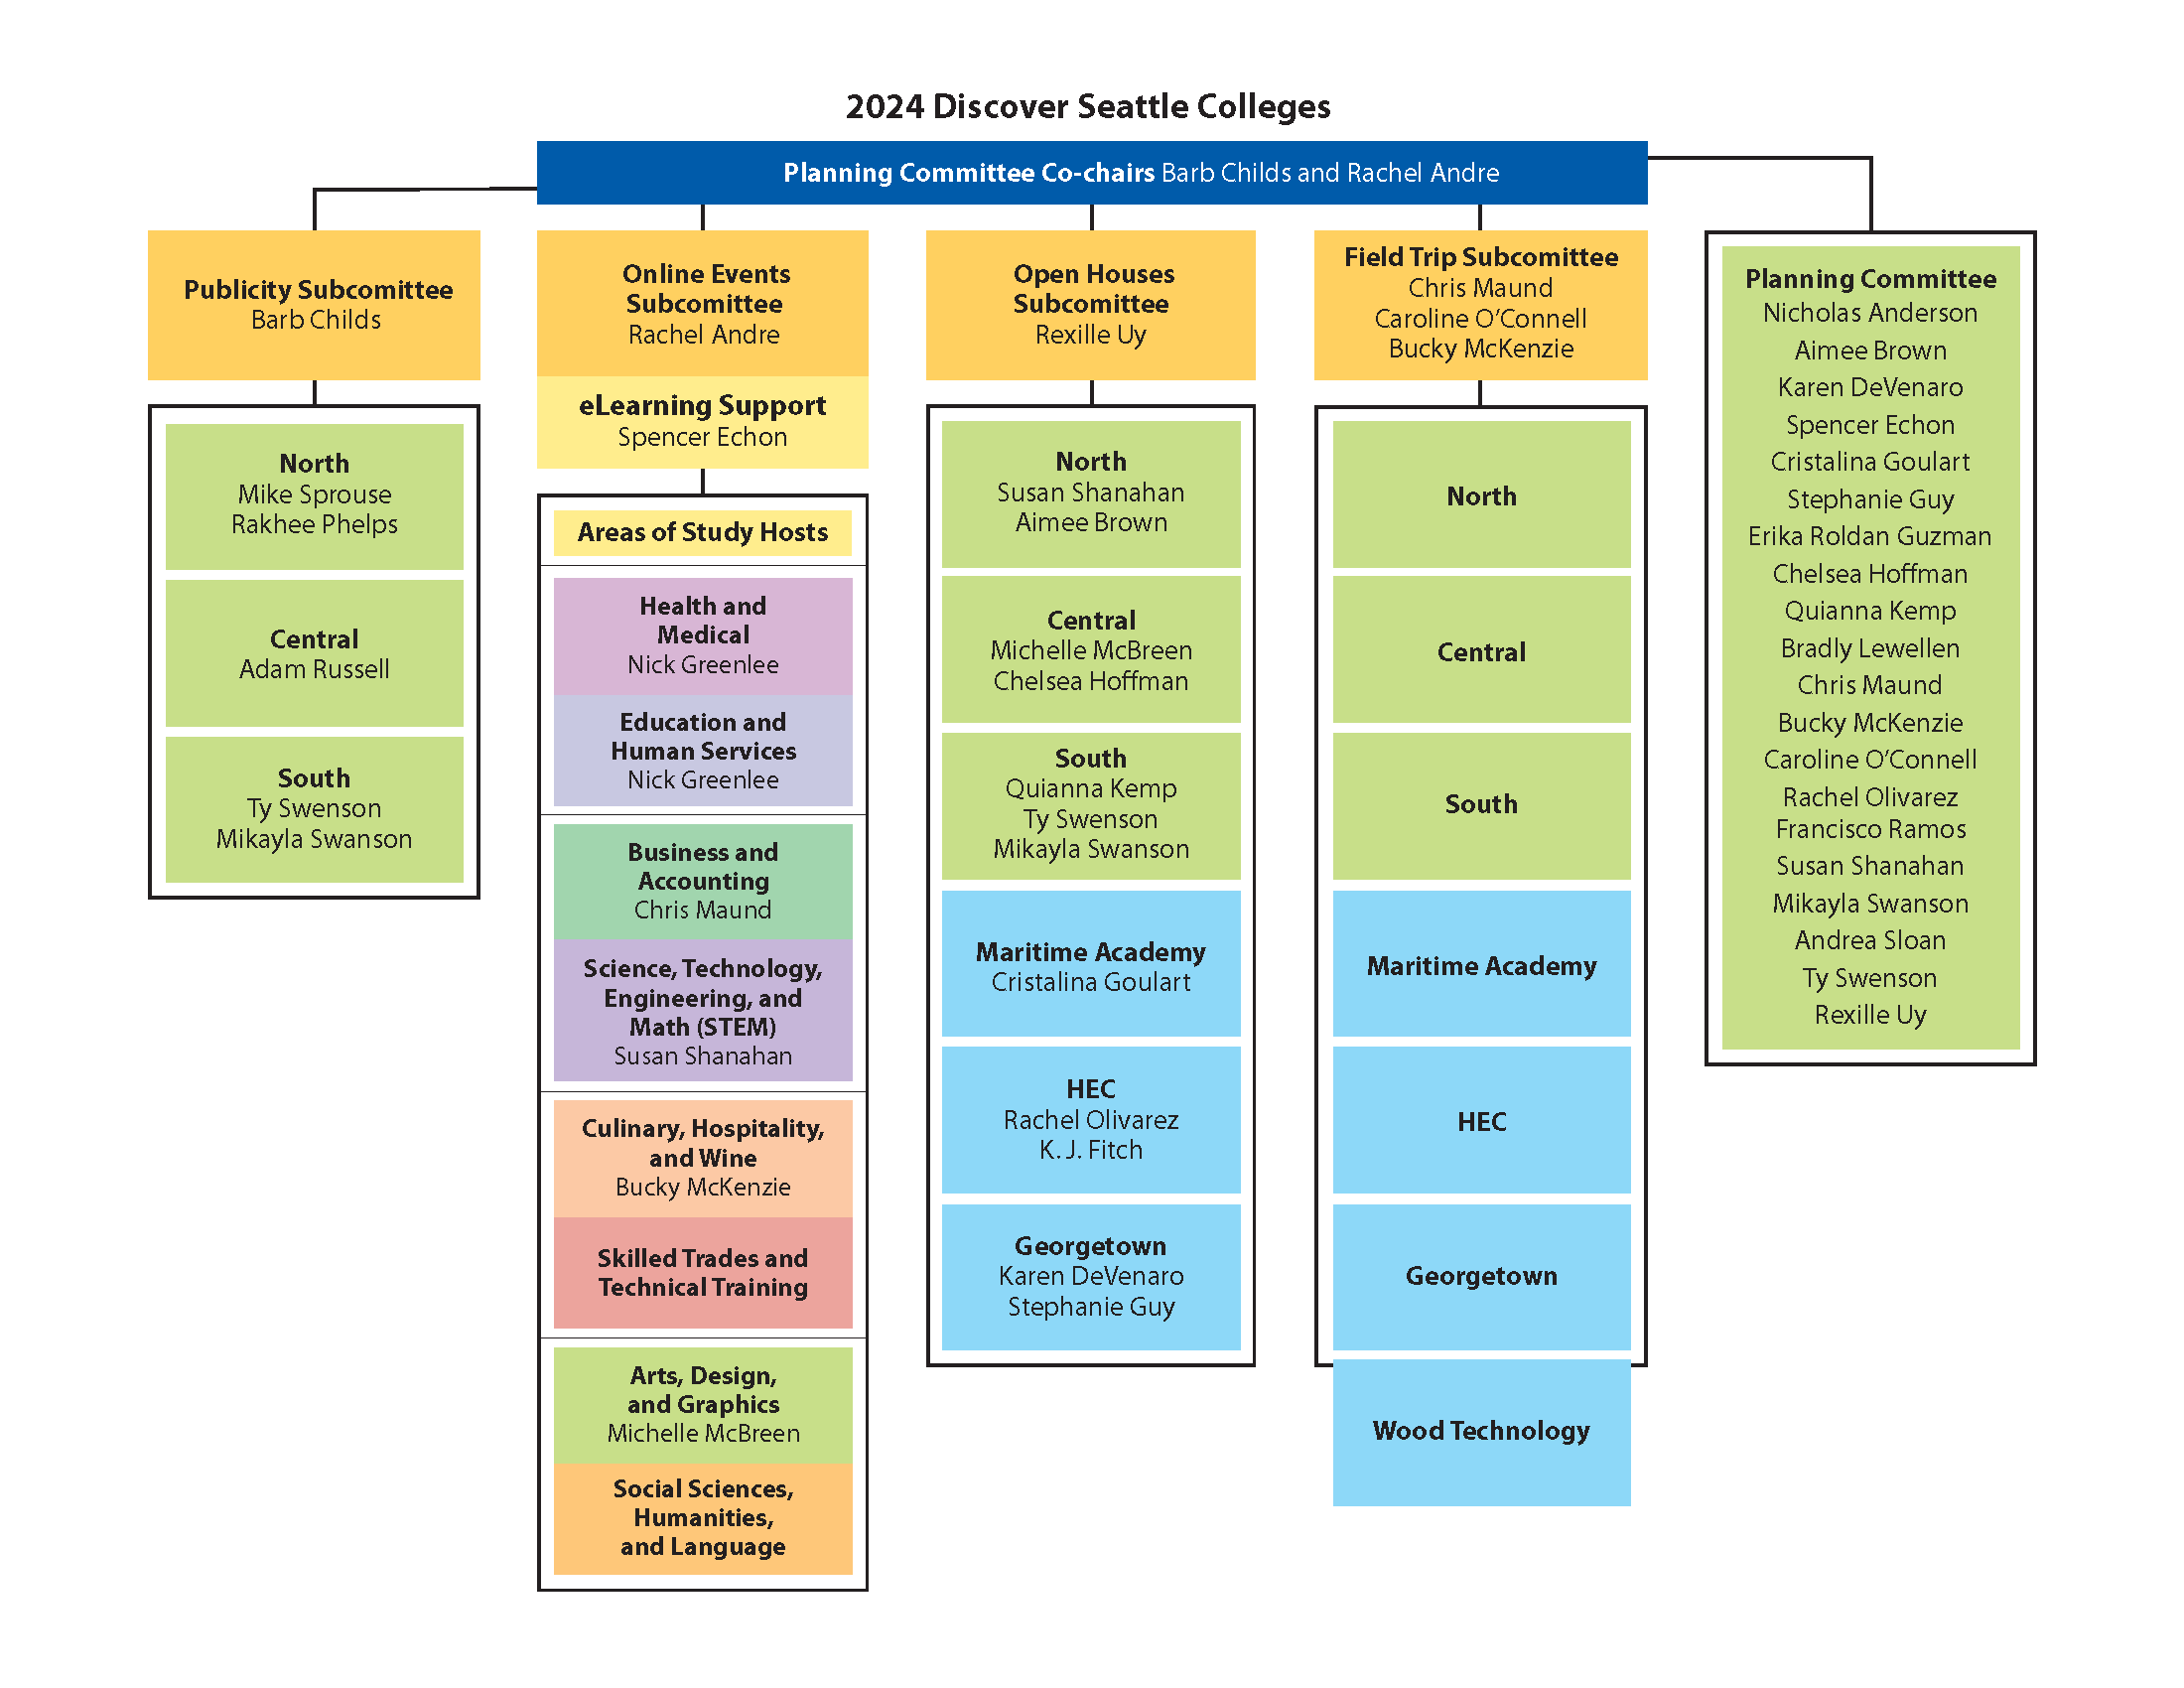 2024 Discovery planning committee org chart